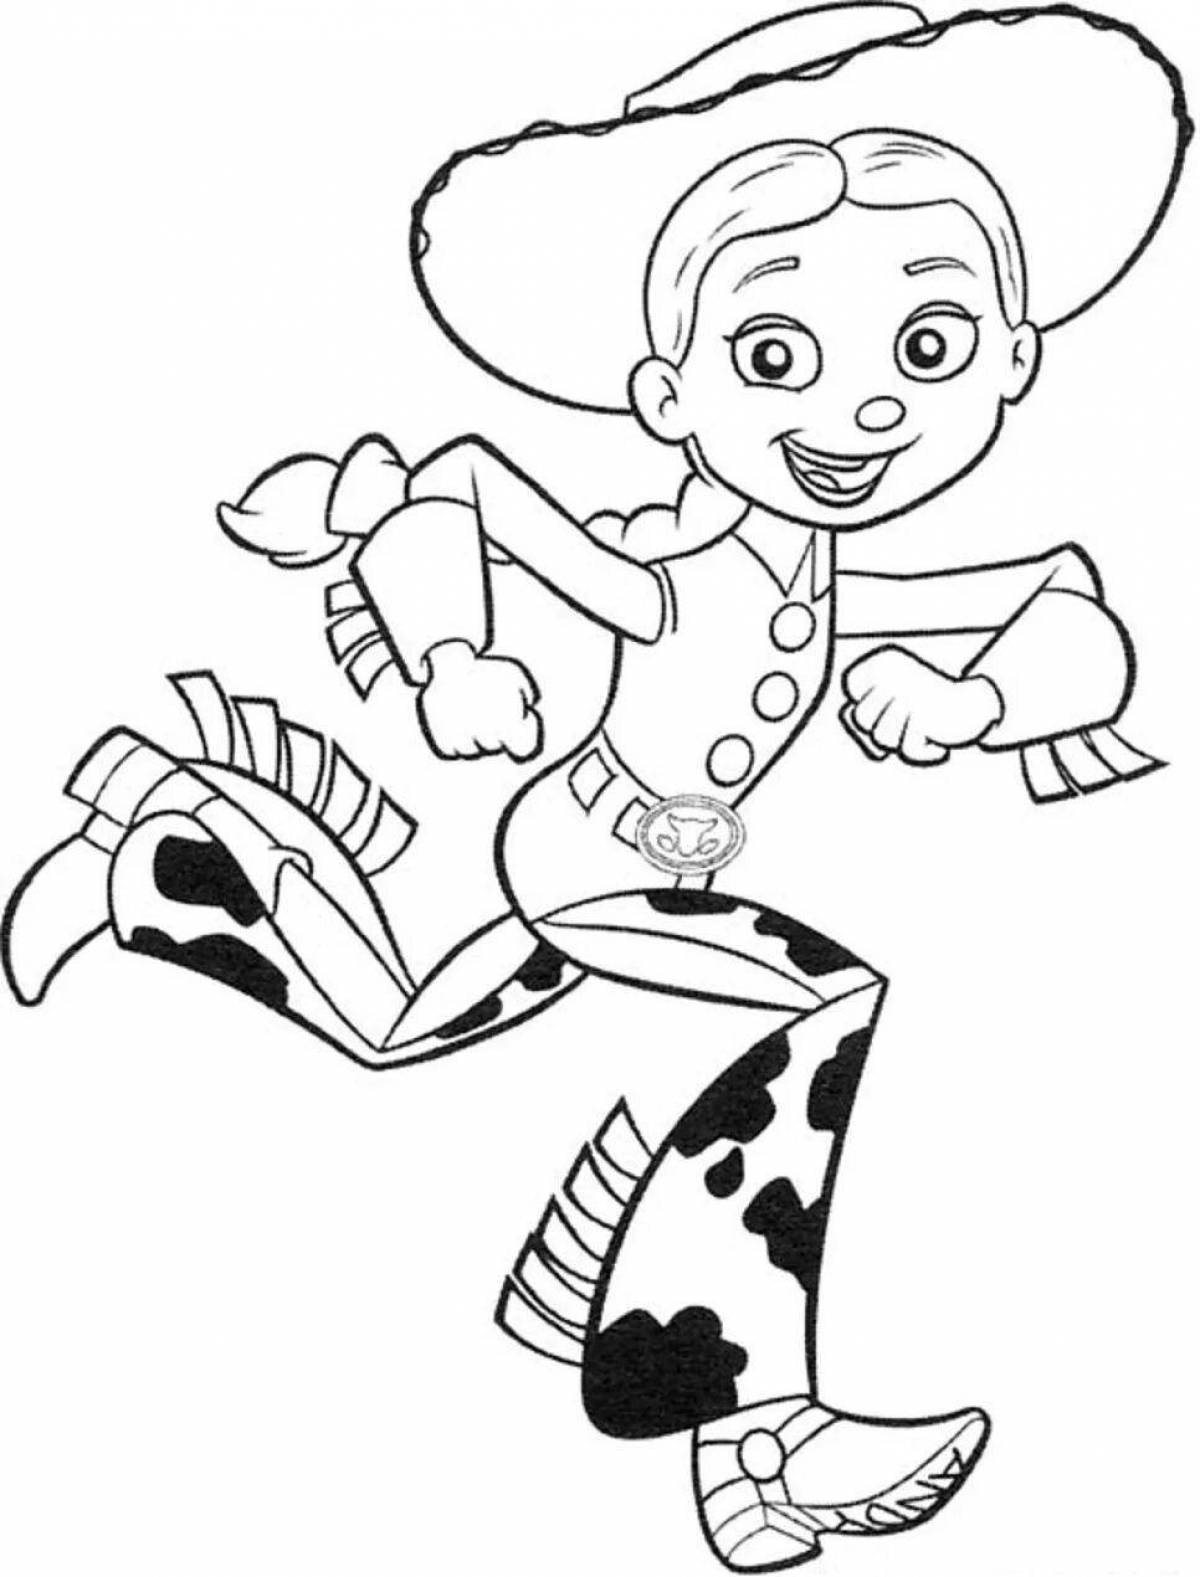 Jessie's adorable toy story coloring book